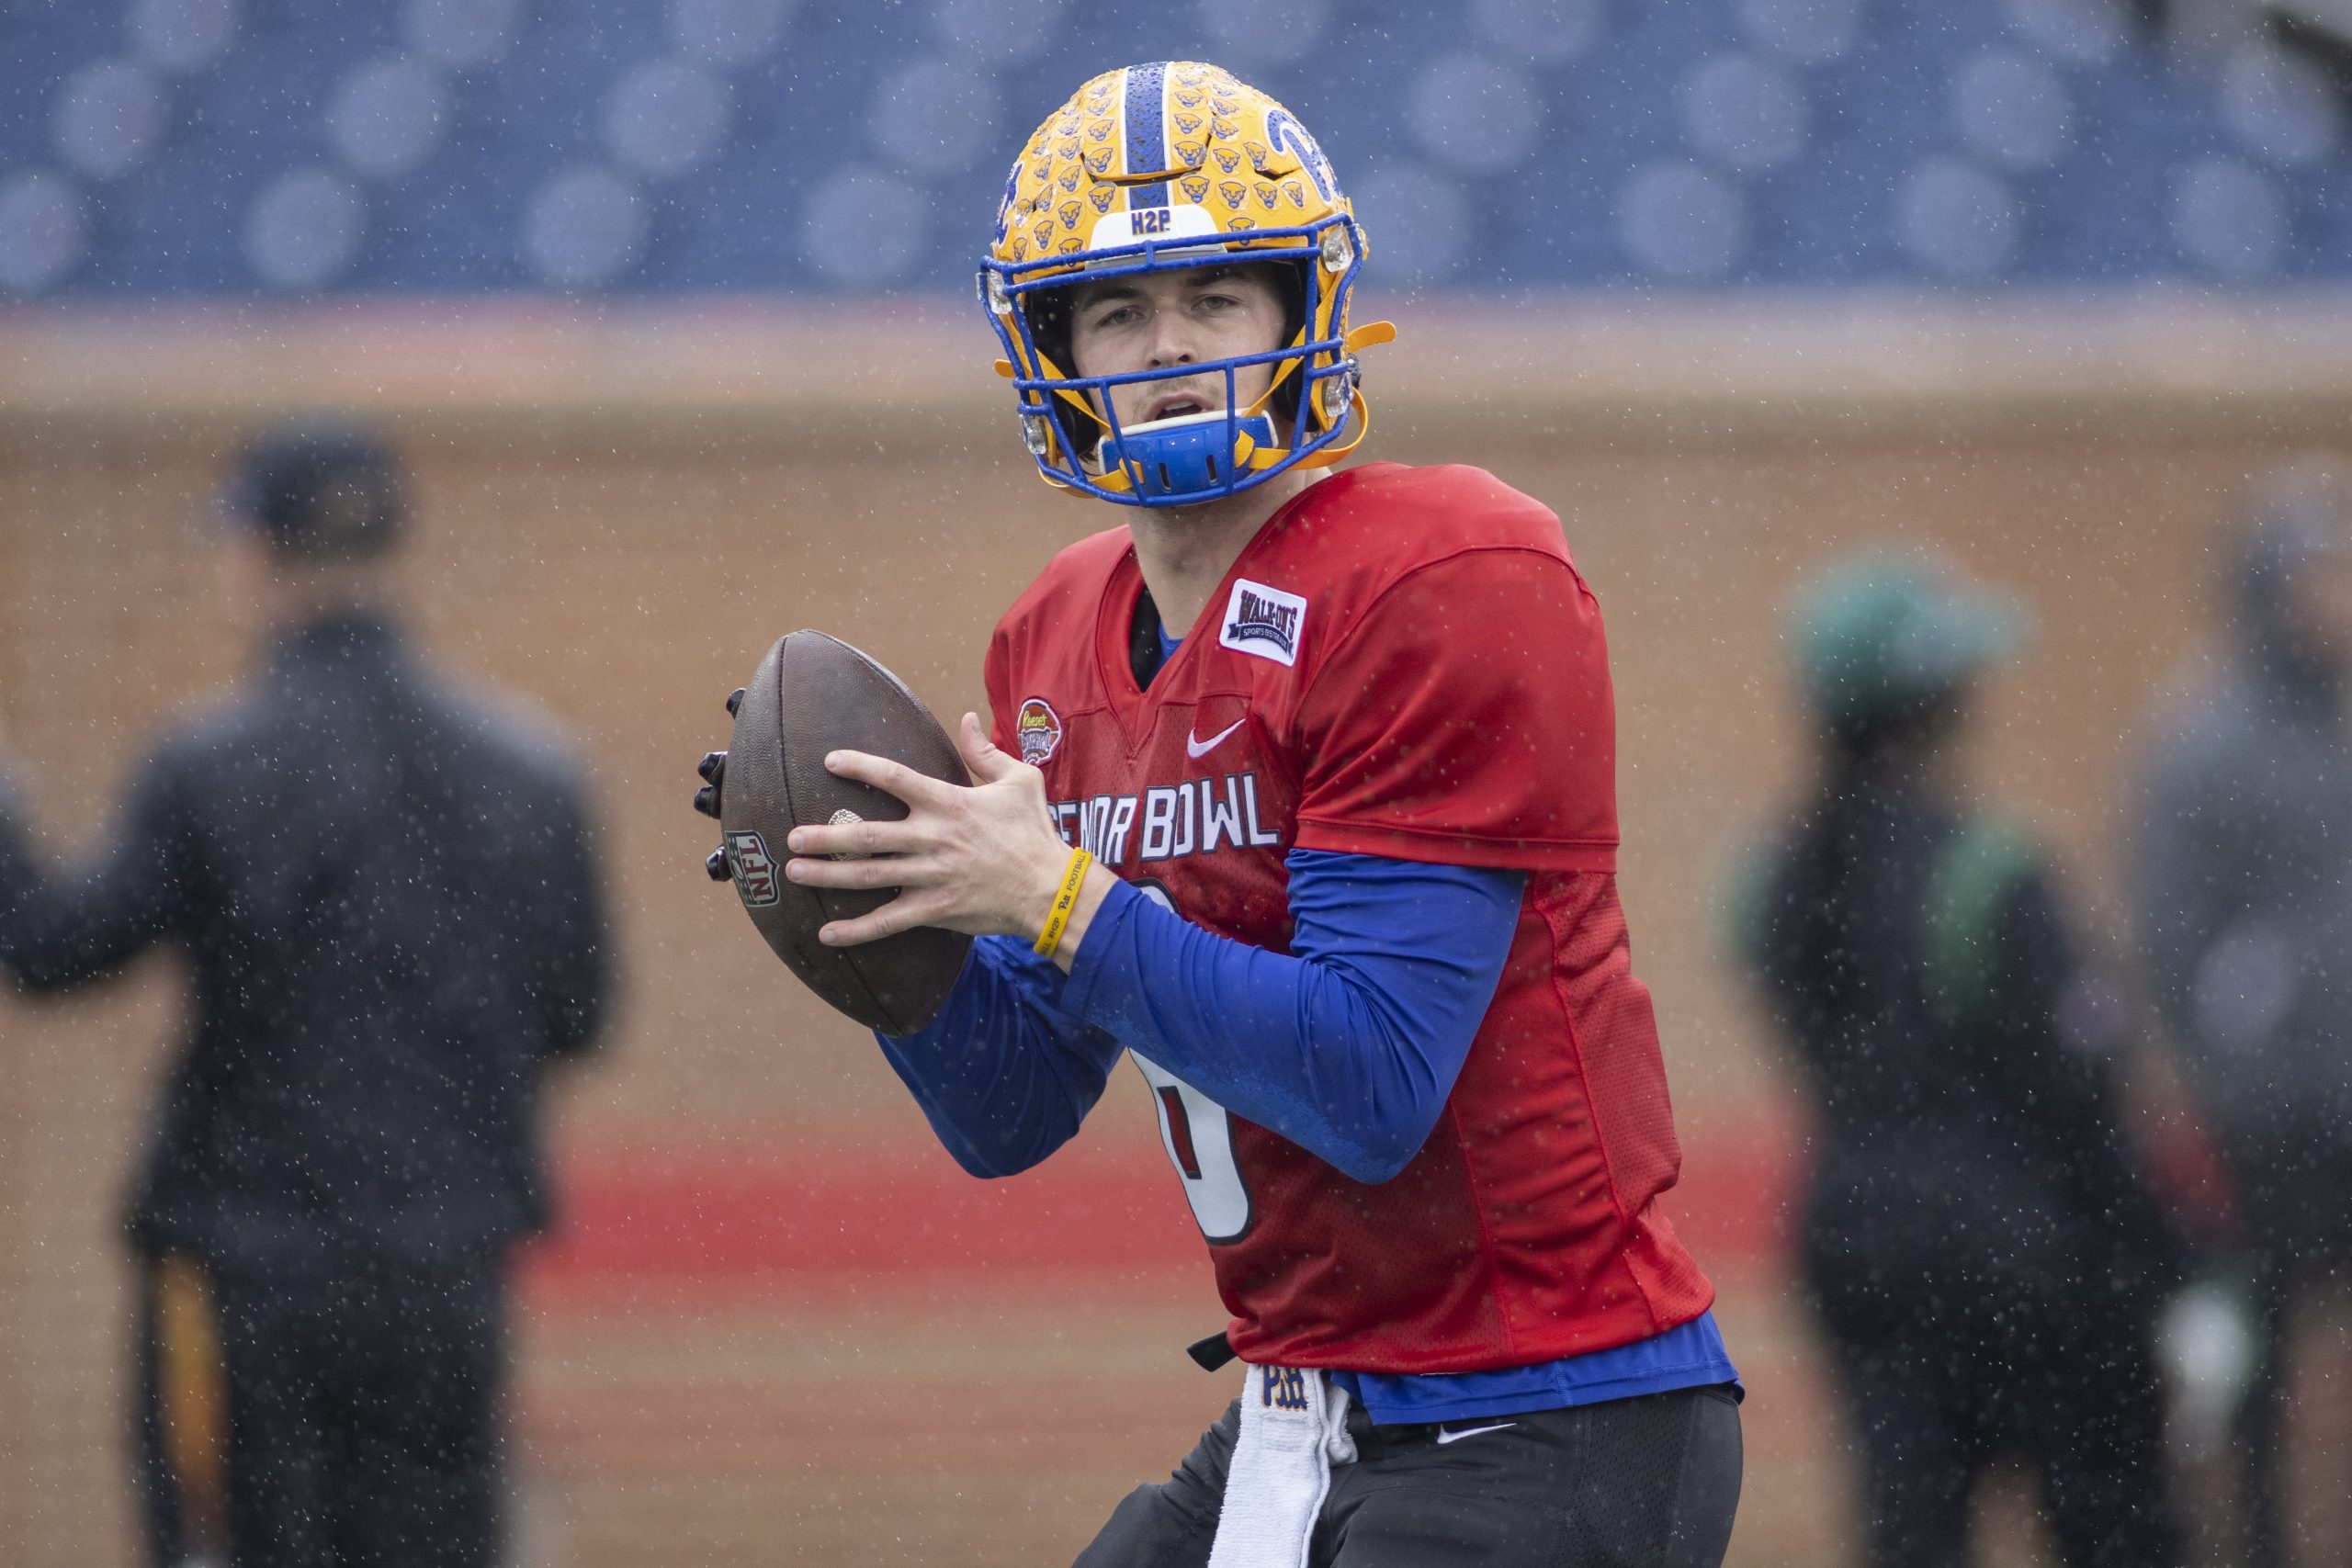 National quarterback Kenny Pickett of Pittsburgh (8) looks to throw during National practice for the 2022 Senior Bowl in Mobile, AL, USA.